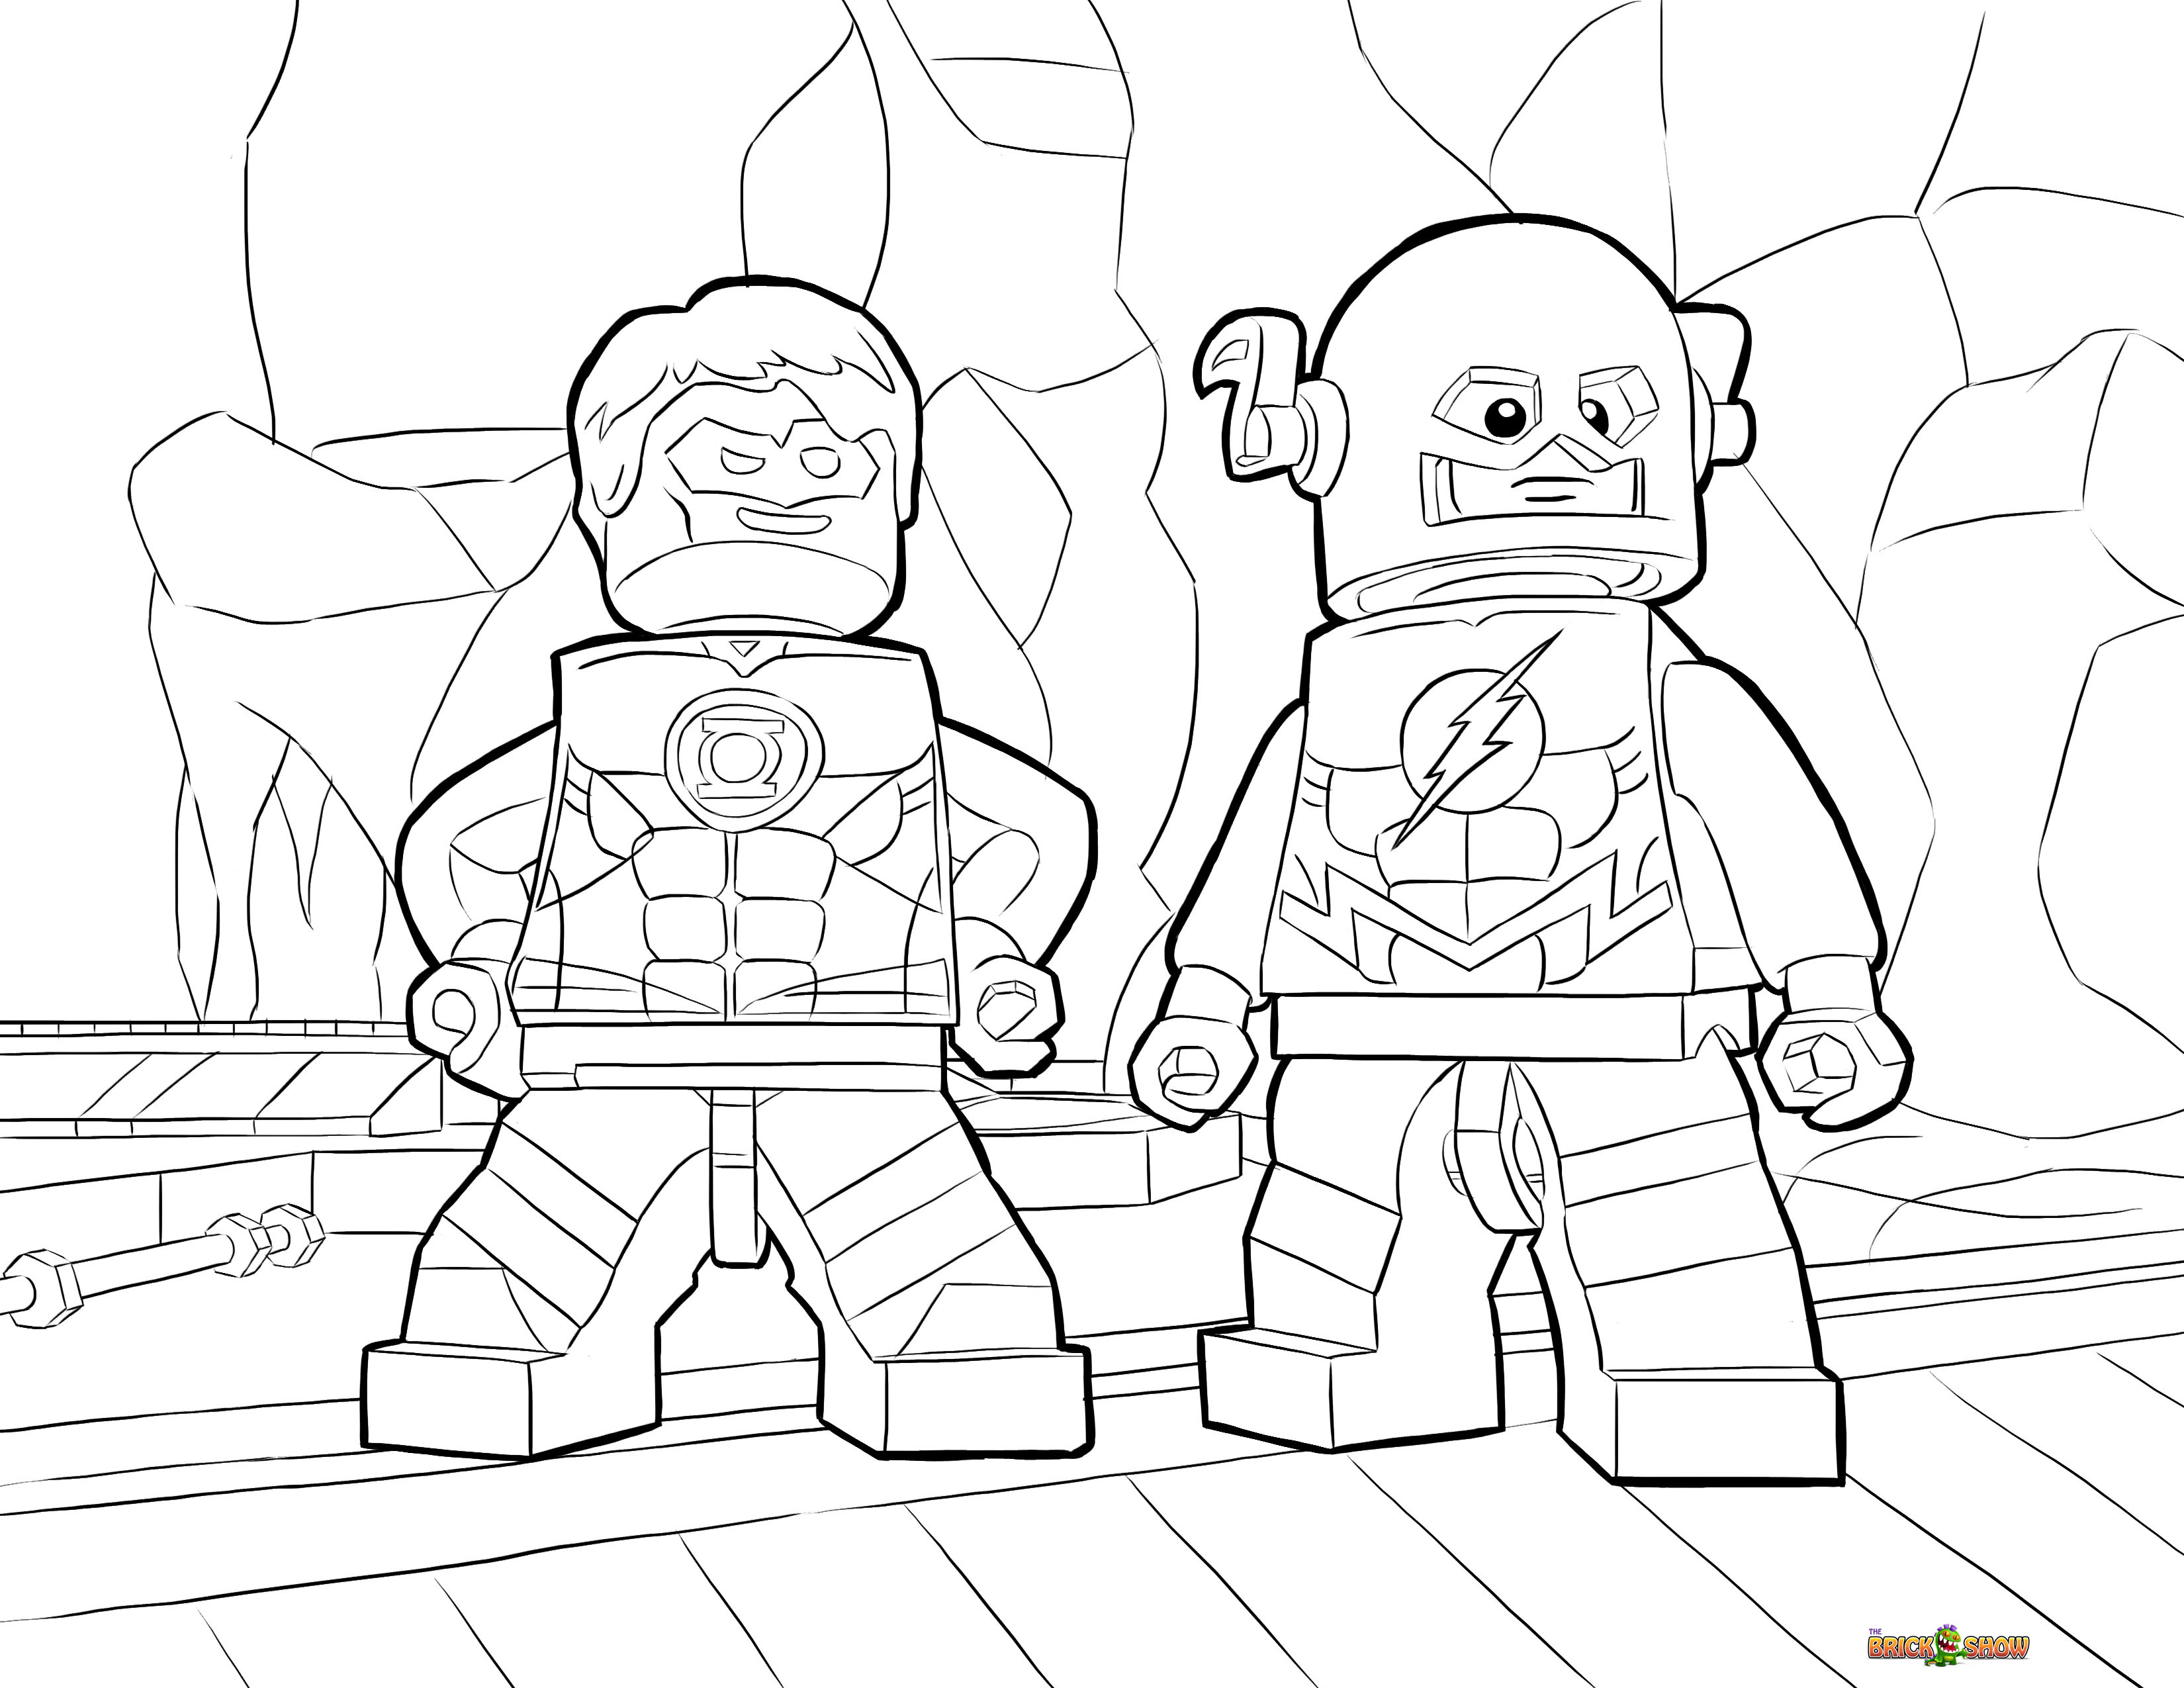 Lego batman coloring pages to download and print for free